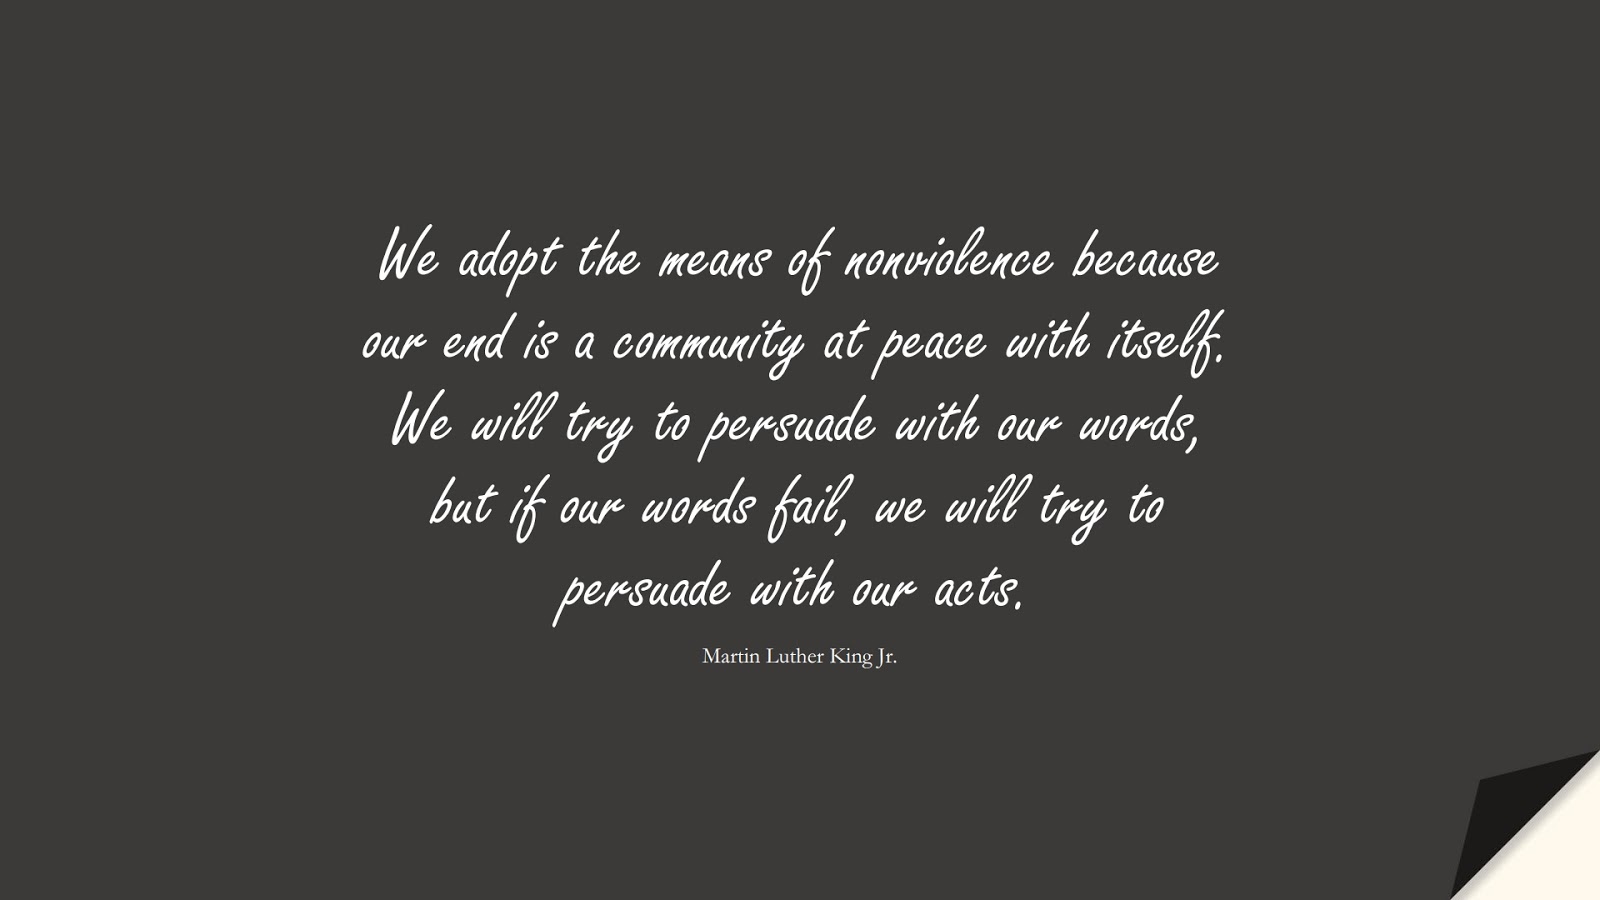 We adopt the means of nonviolence because our end is a community at peace with itself. We will try to persuade with our words, but if our words fail, we will try to persuade with our acts. (Martin Luther King Jr.);  #MartinLutherKingJrQuotes